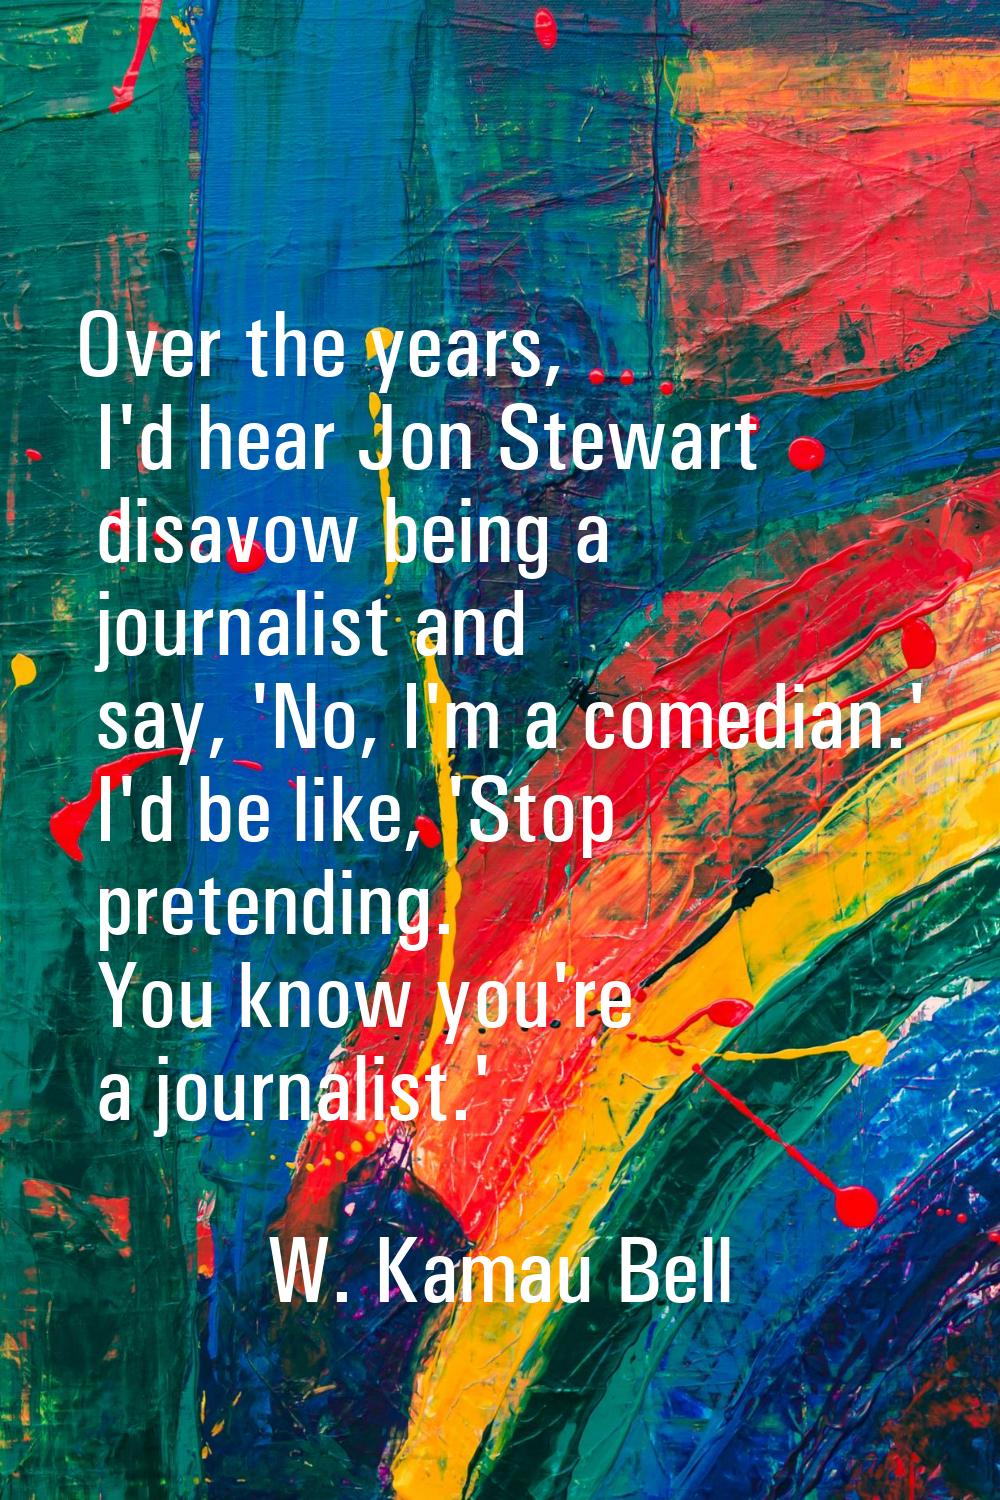 Over the years, I'd hear Jon Stewart disavow being a journalist and say, 'No, I'm a comedian.' I'd 